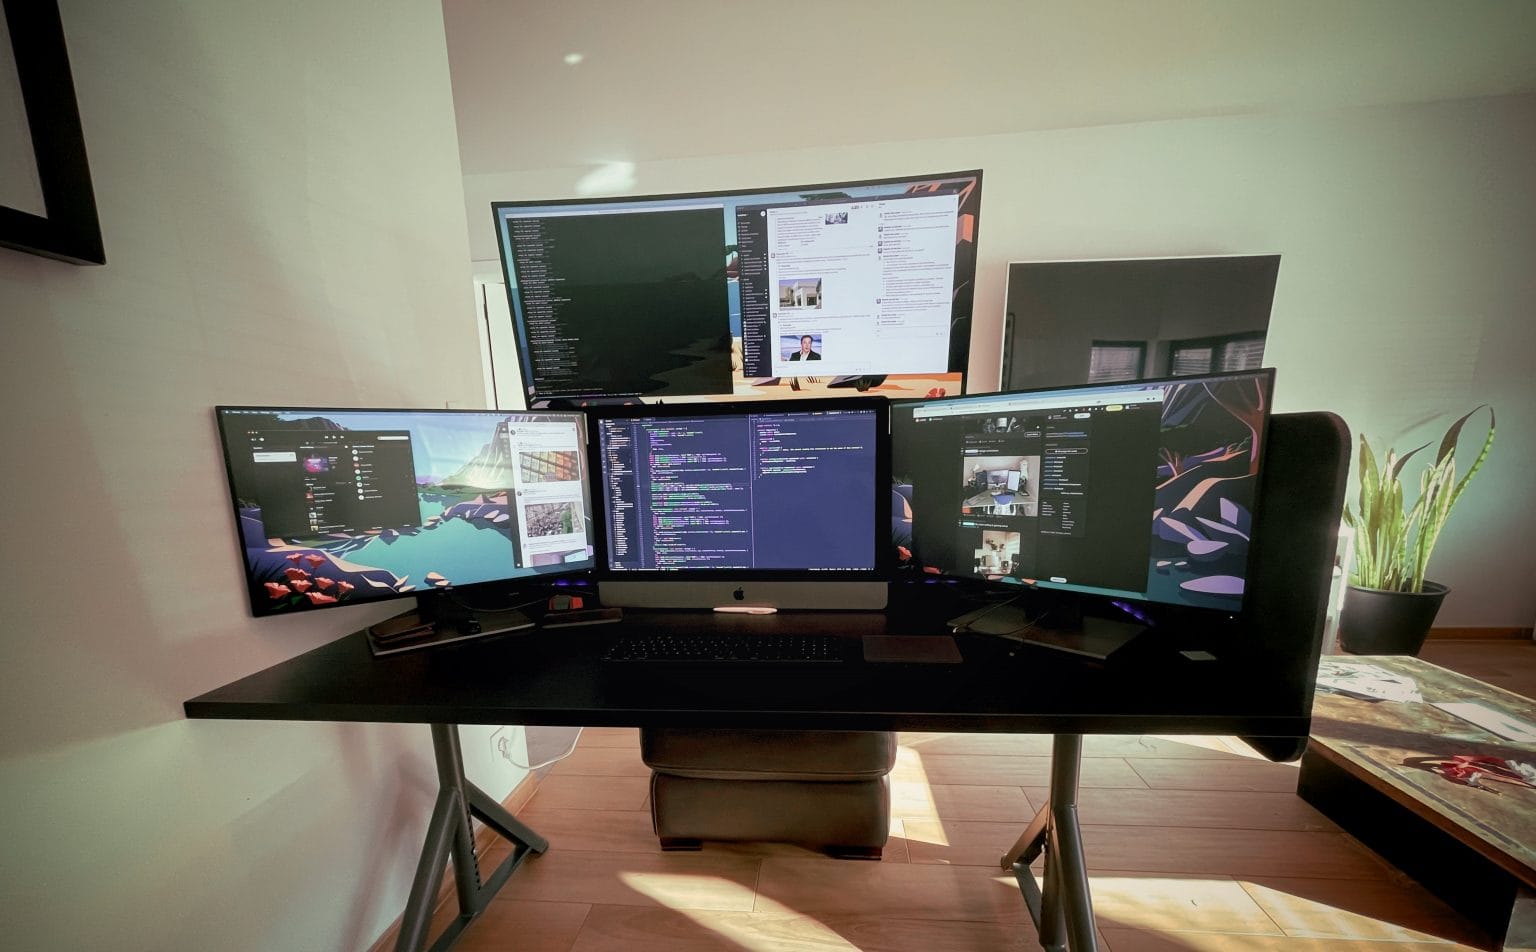 This setup has four monitors. How about seven, though?